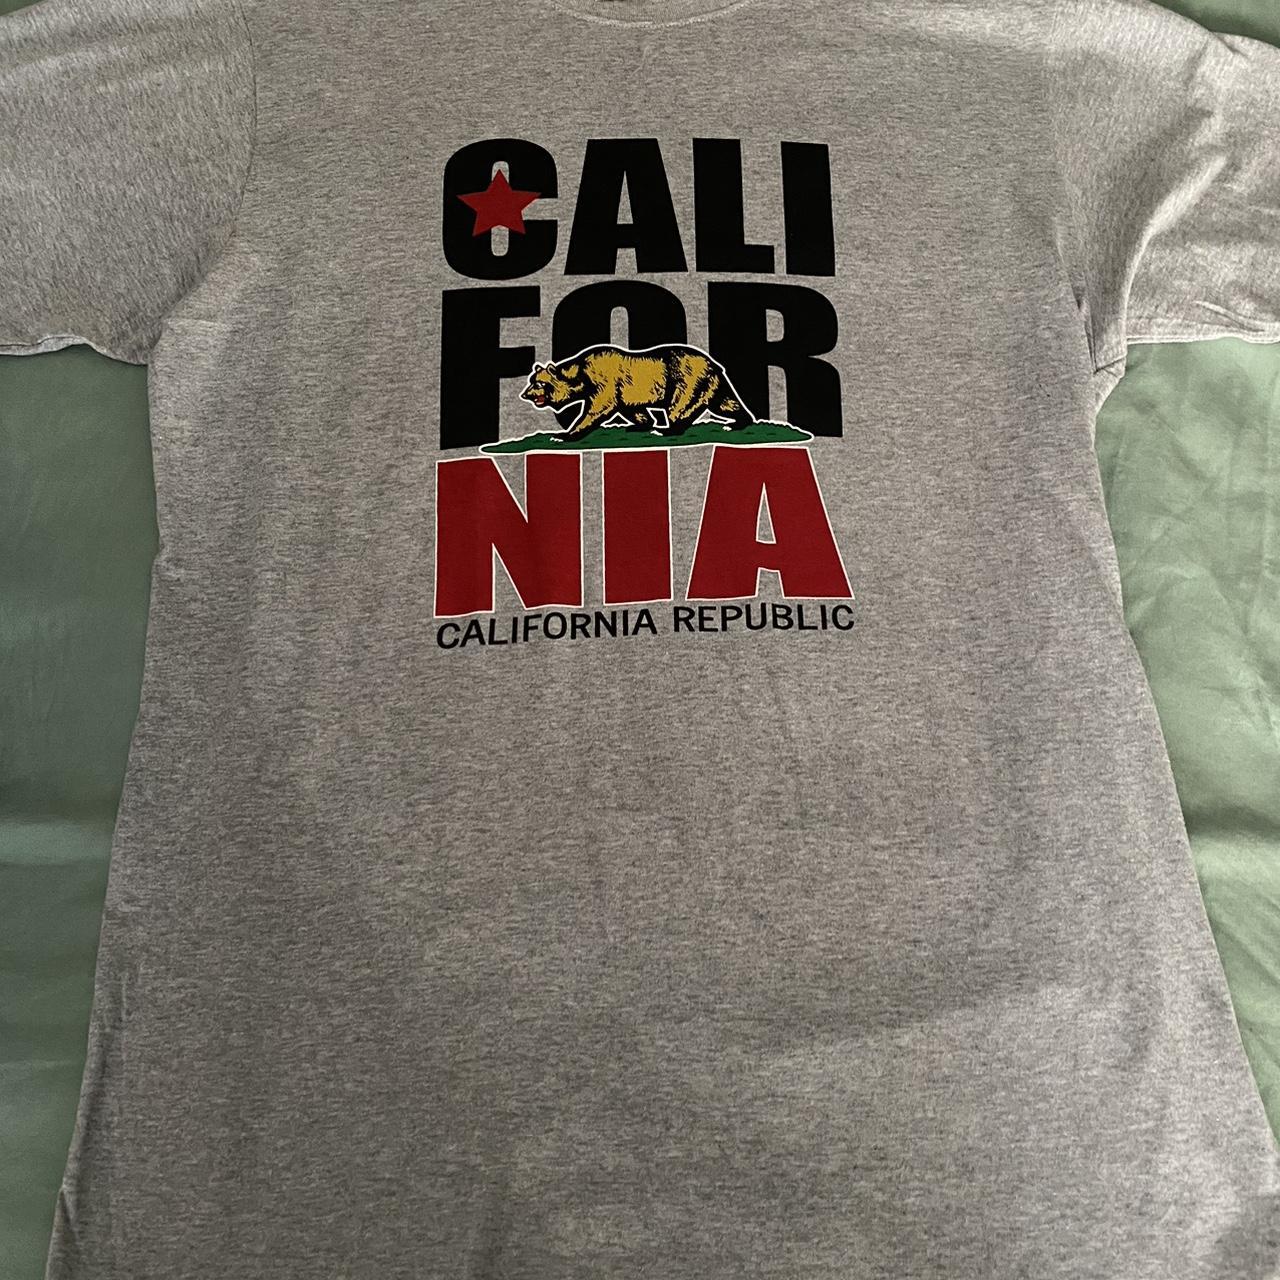 California Looks Men's Grey and Red T-shirt